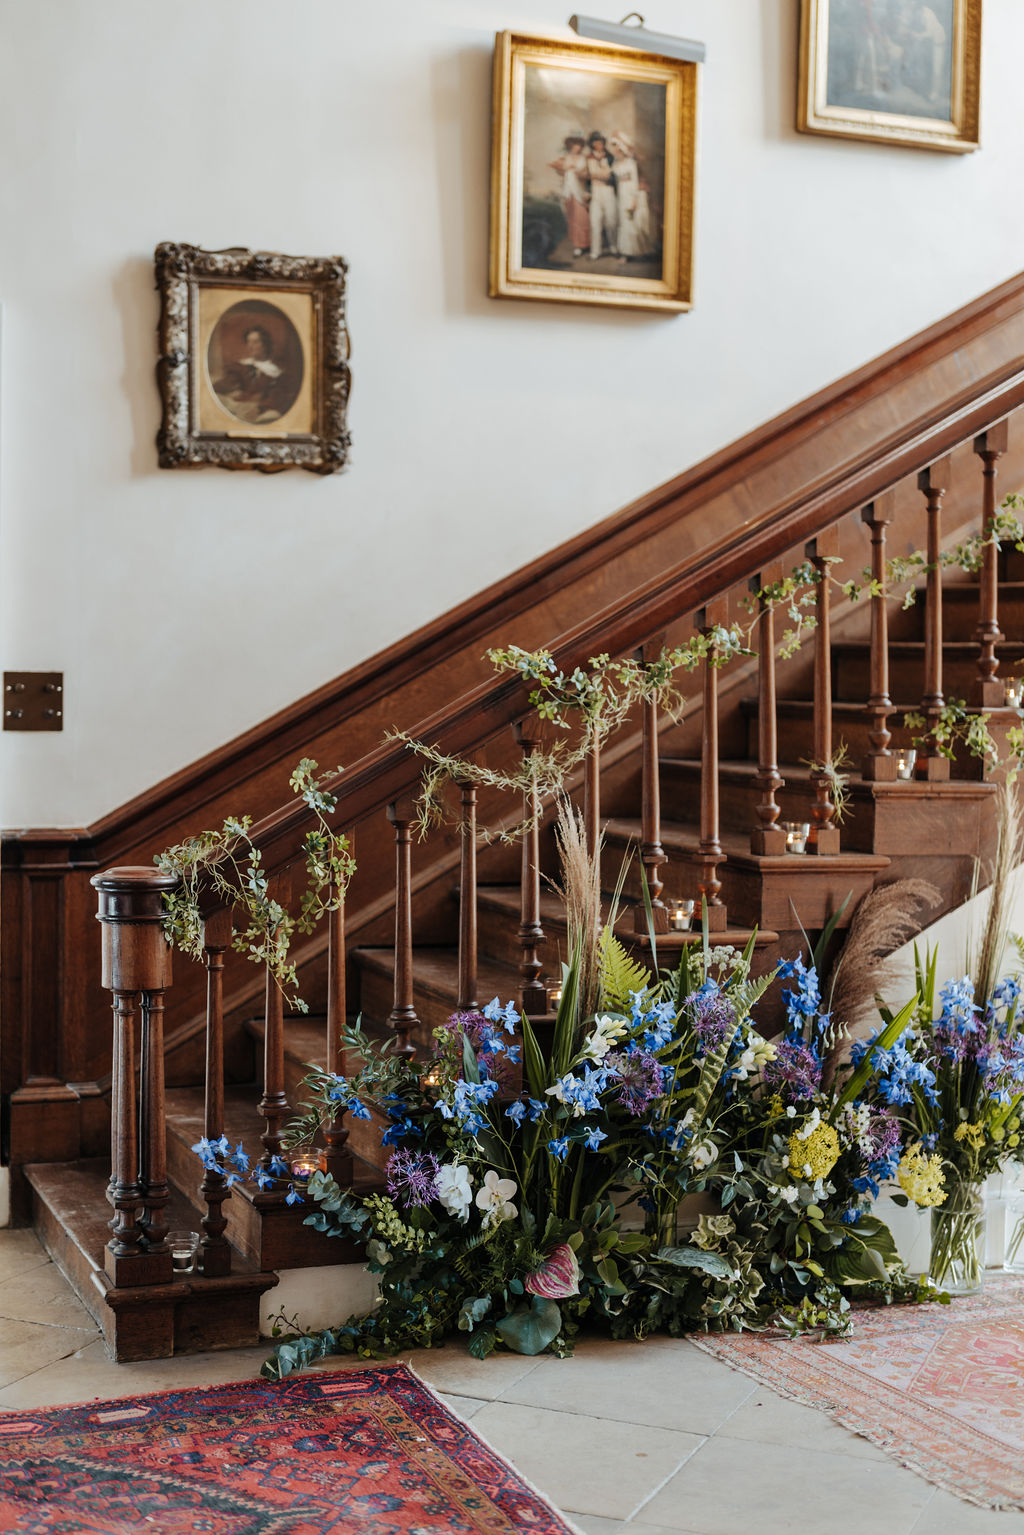 A wooden staircase has been dressed with garlands of ivy and blue and purple flower arrangements surround the base of the staircase